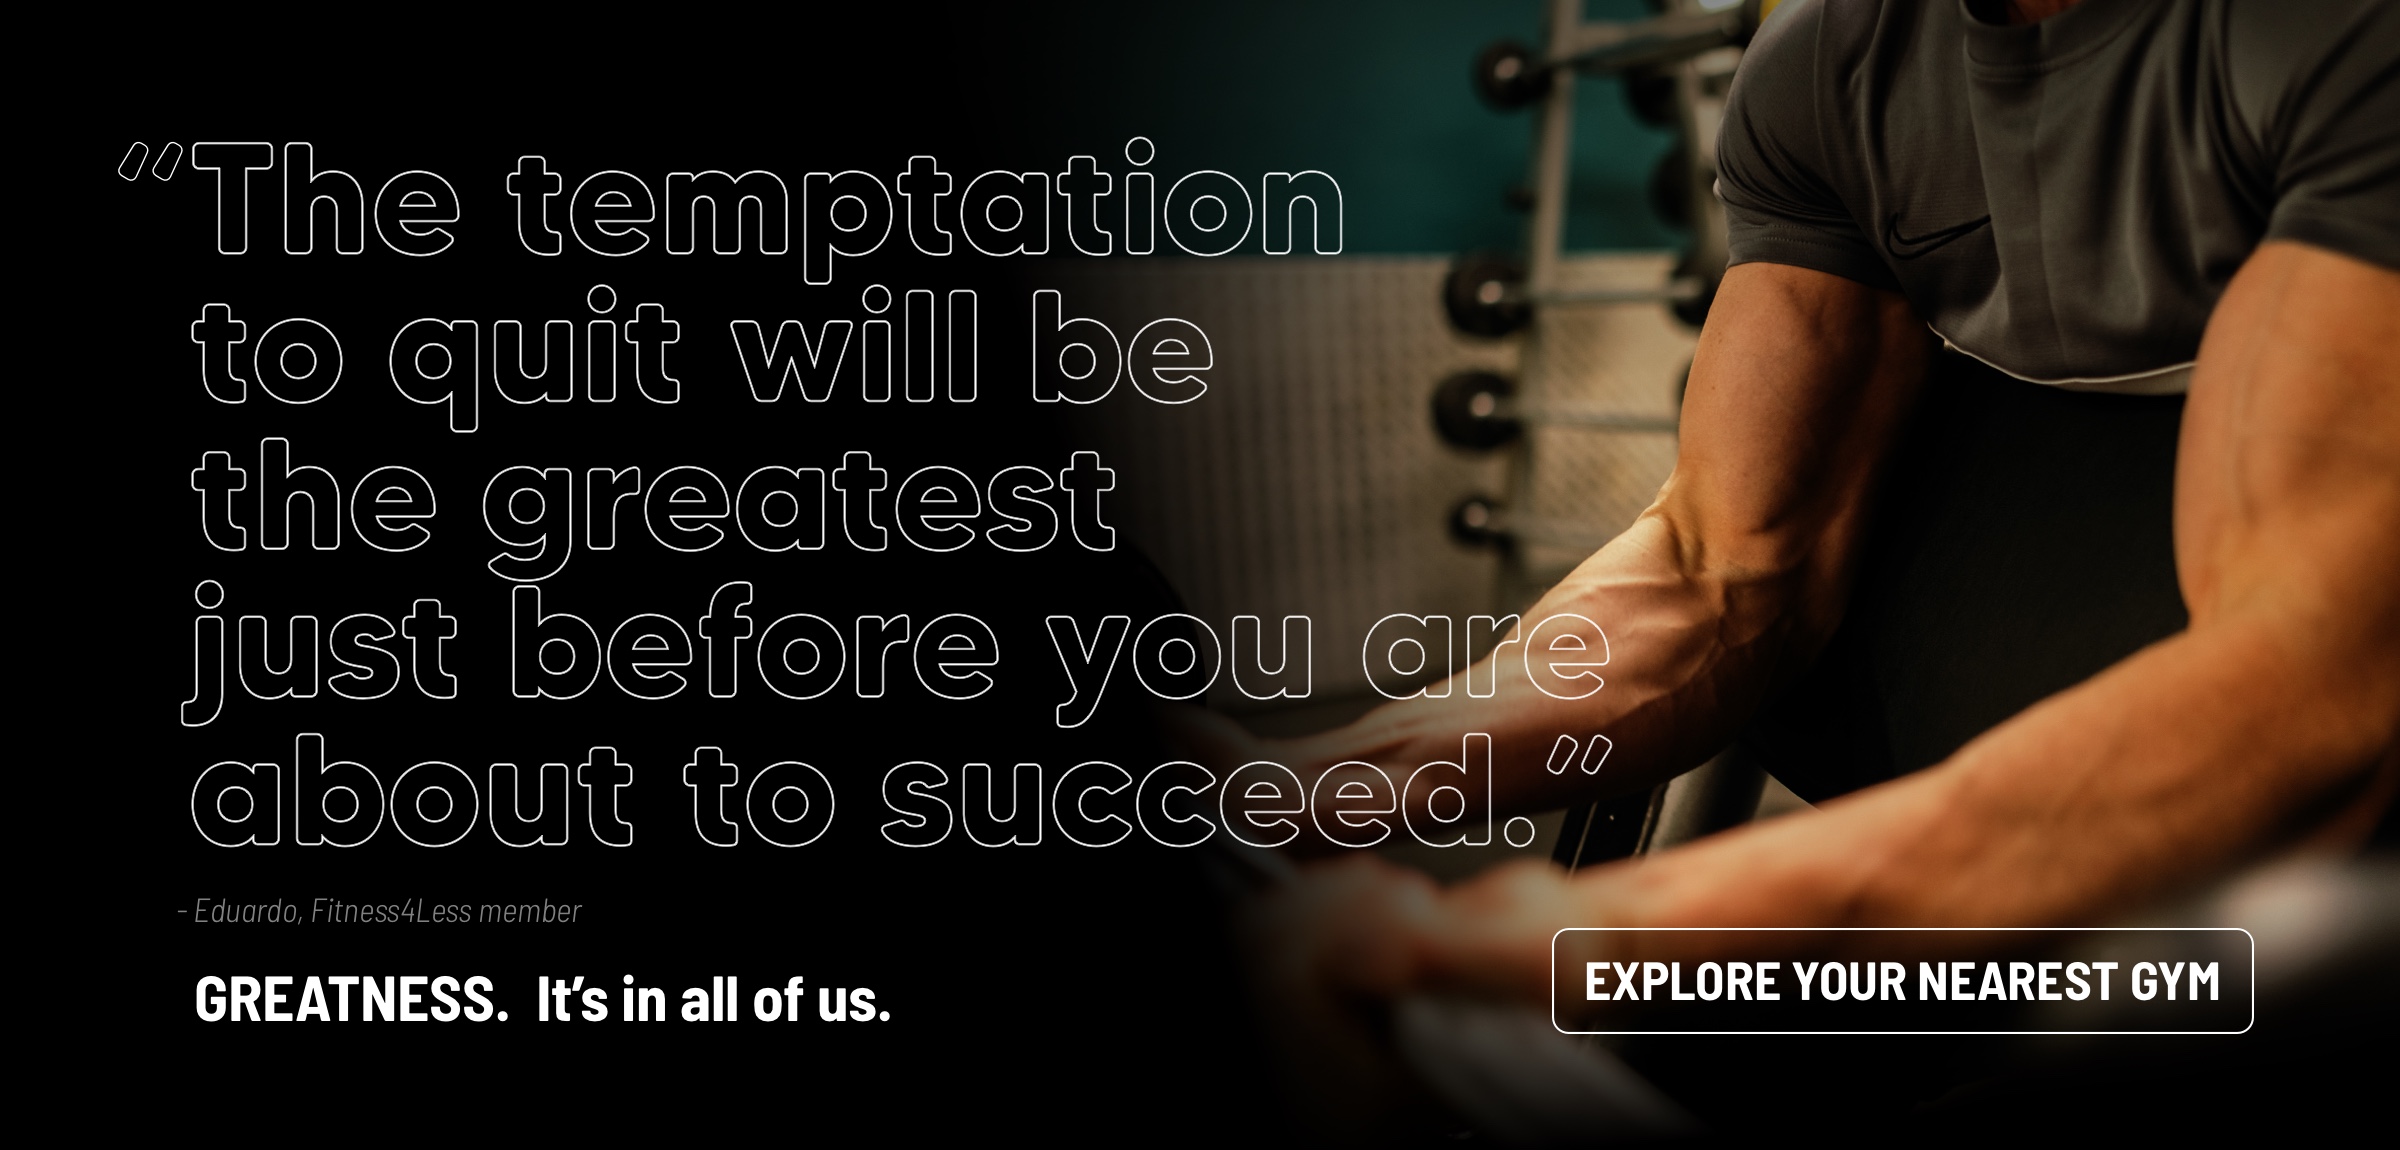 Greatness. It's in all of us. Join your local gym.